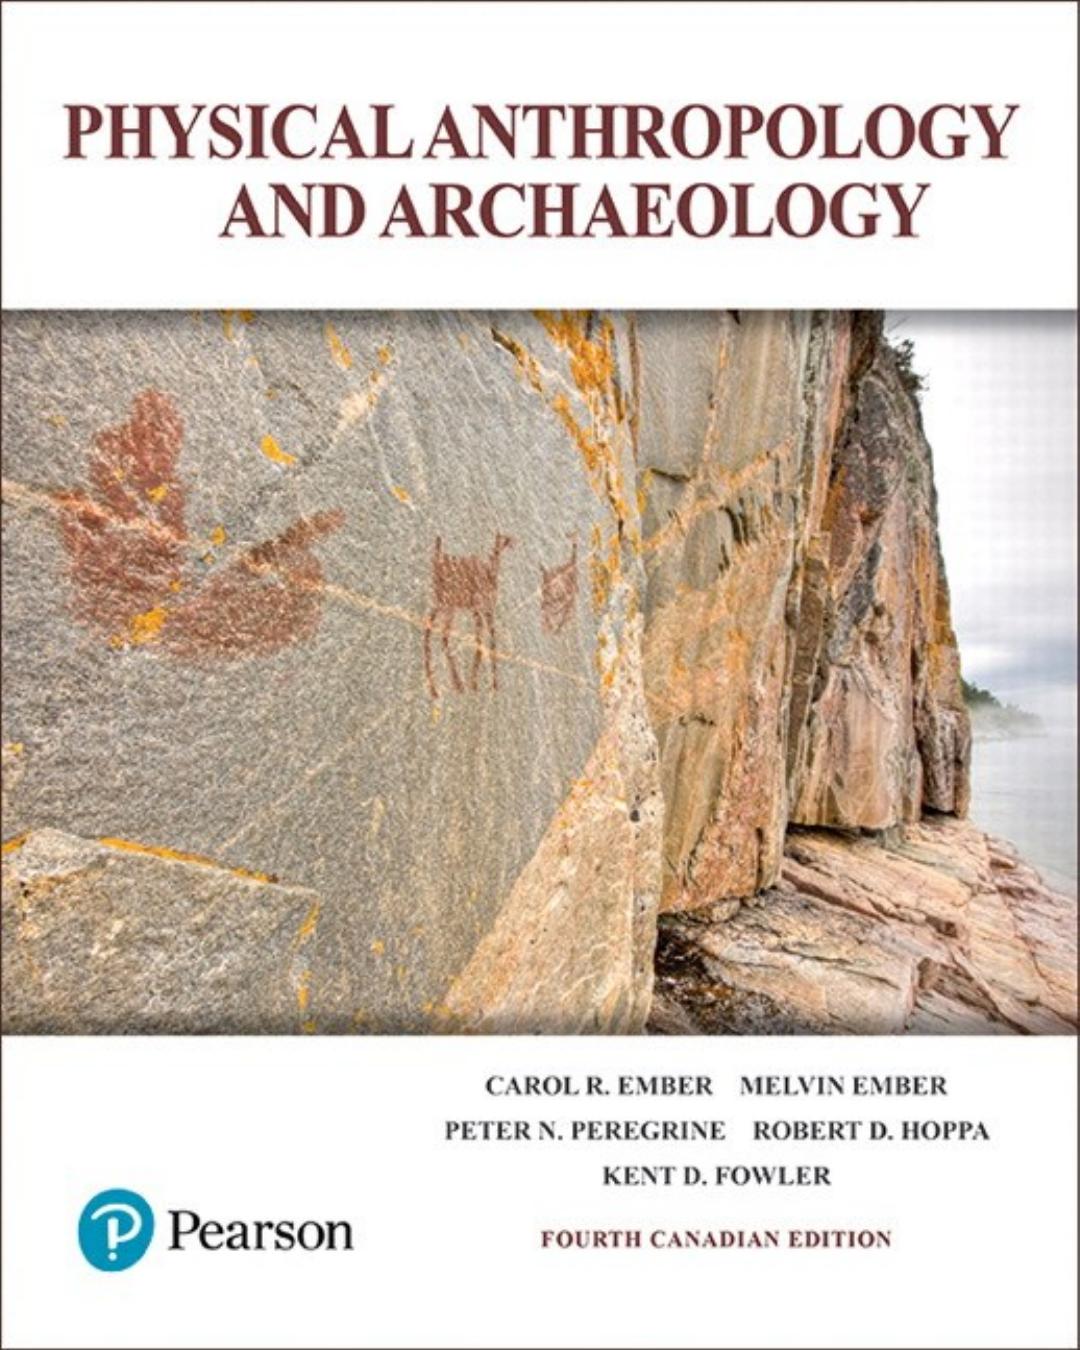 (eBook PDF)Physical Anthropology and Archaeology, 4th Fourth Canadian Edition by Carol R. Ember